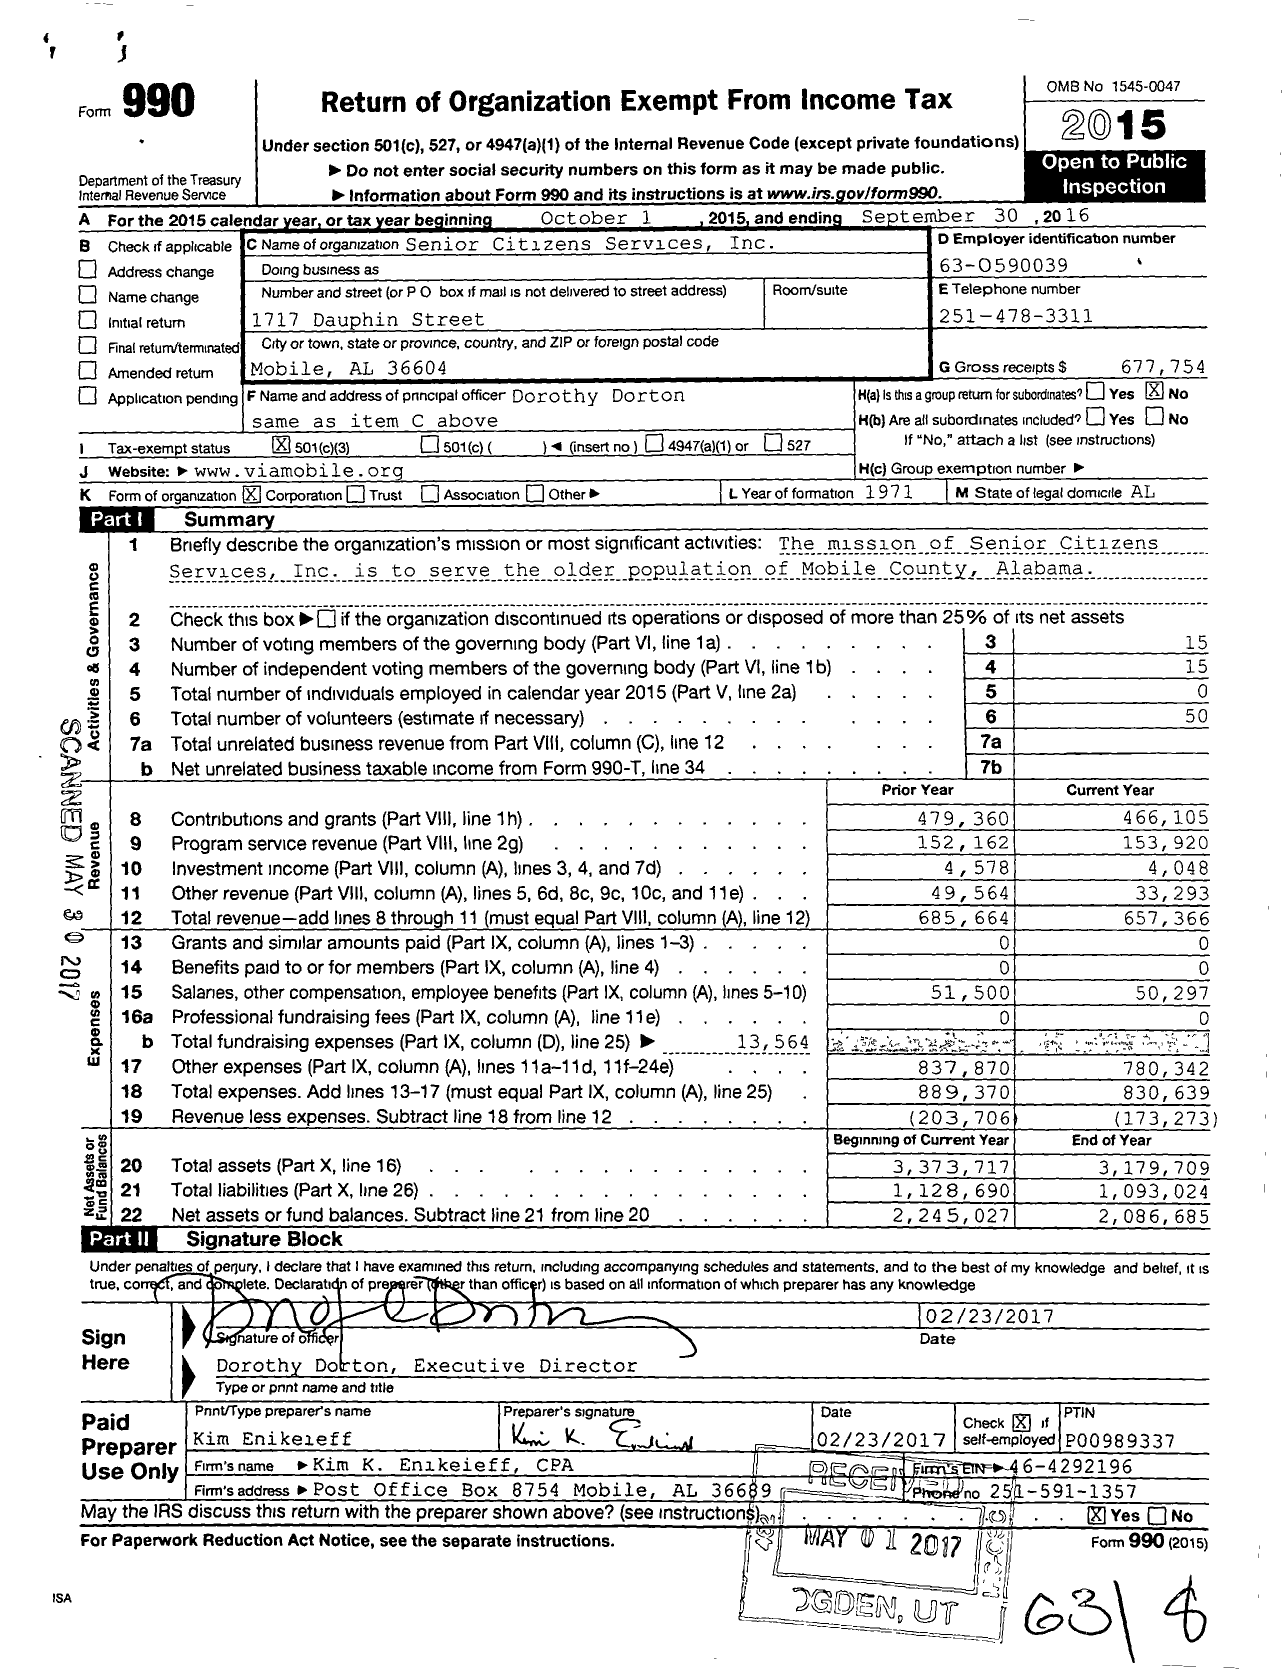 Image of first page of 2015 Form 990 for Senior Citizens Services